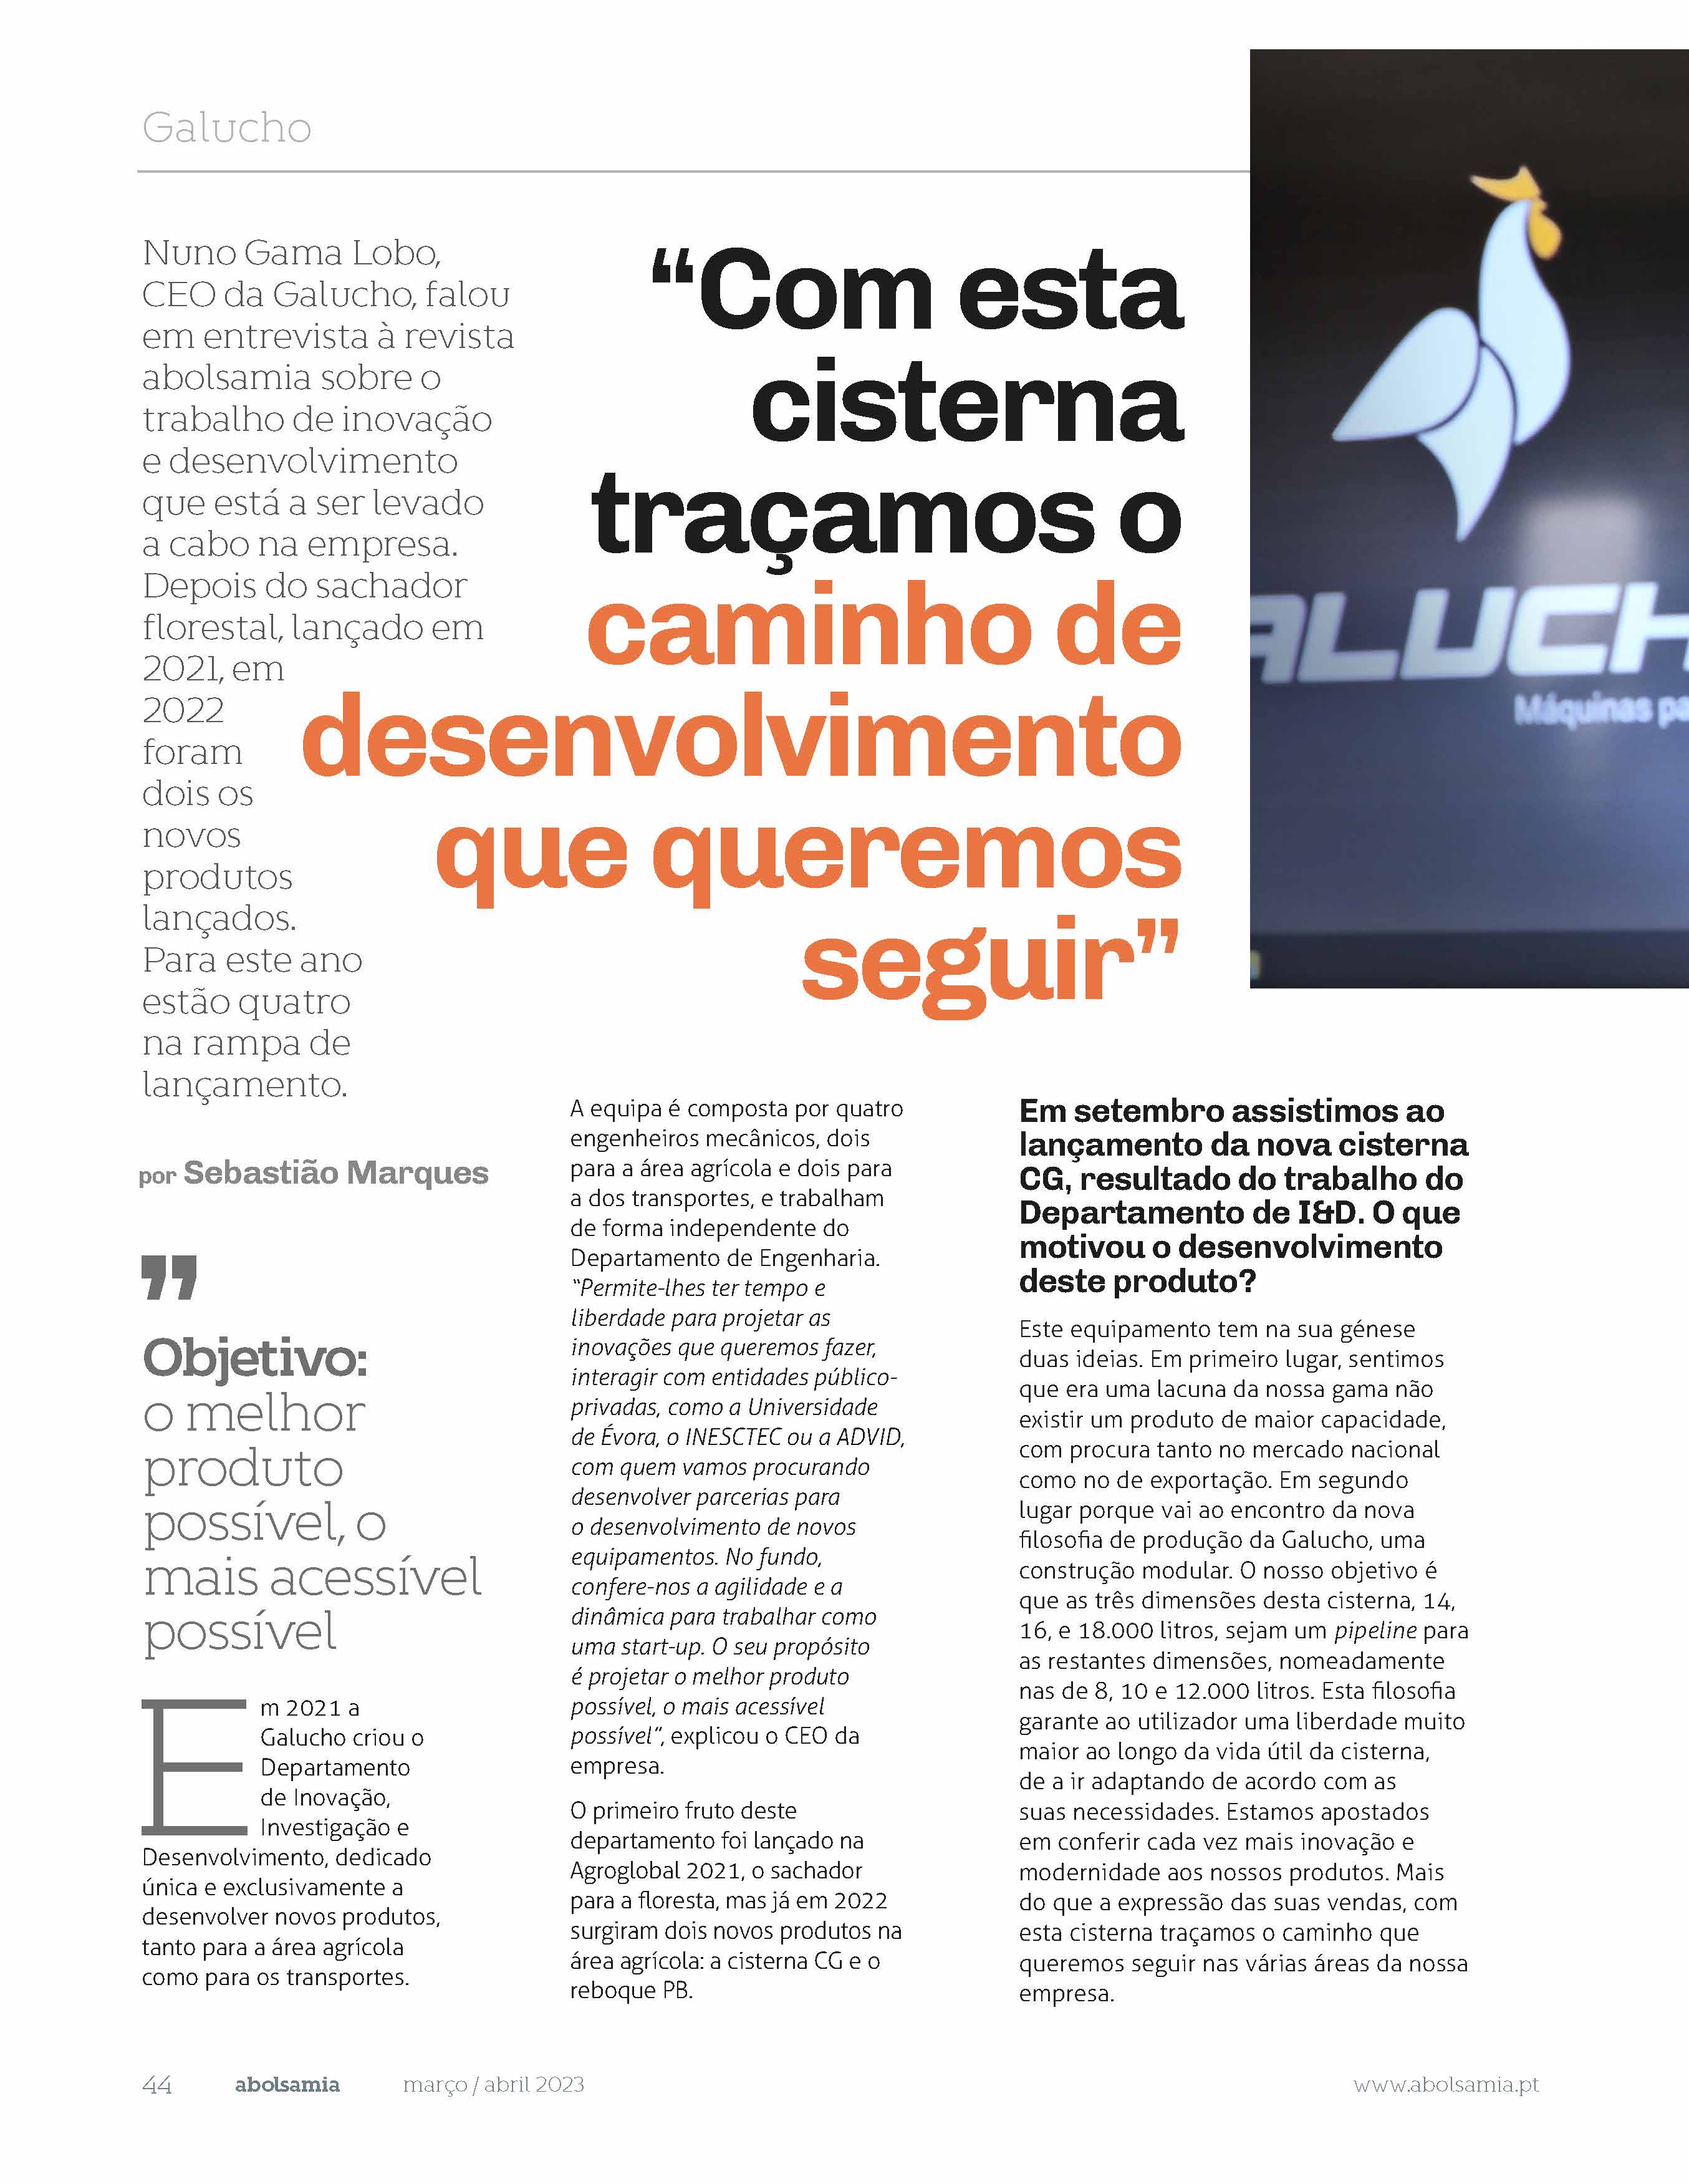 Galucho is present in the 135th edition of Abolsamia magazine